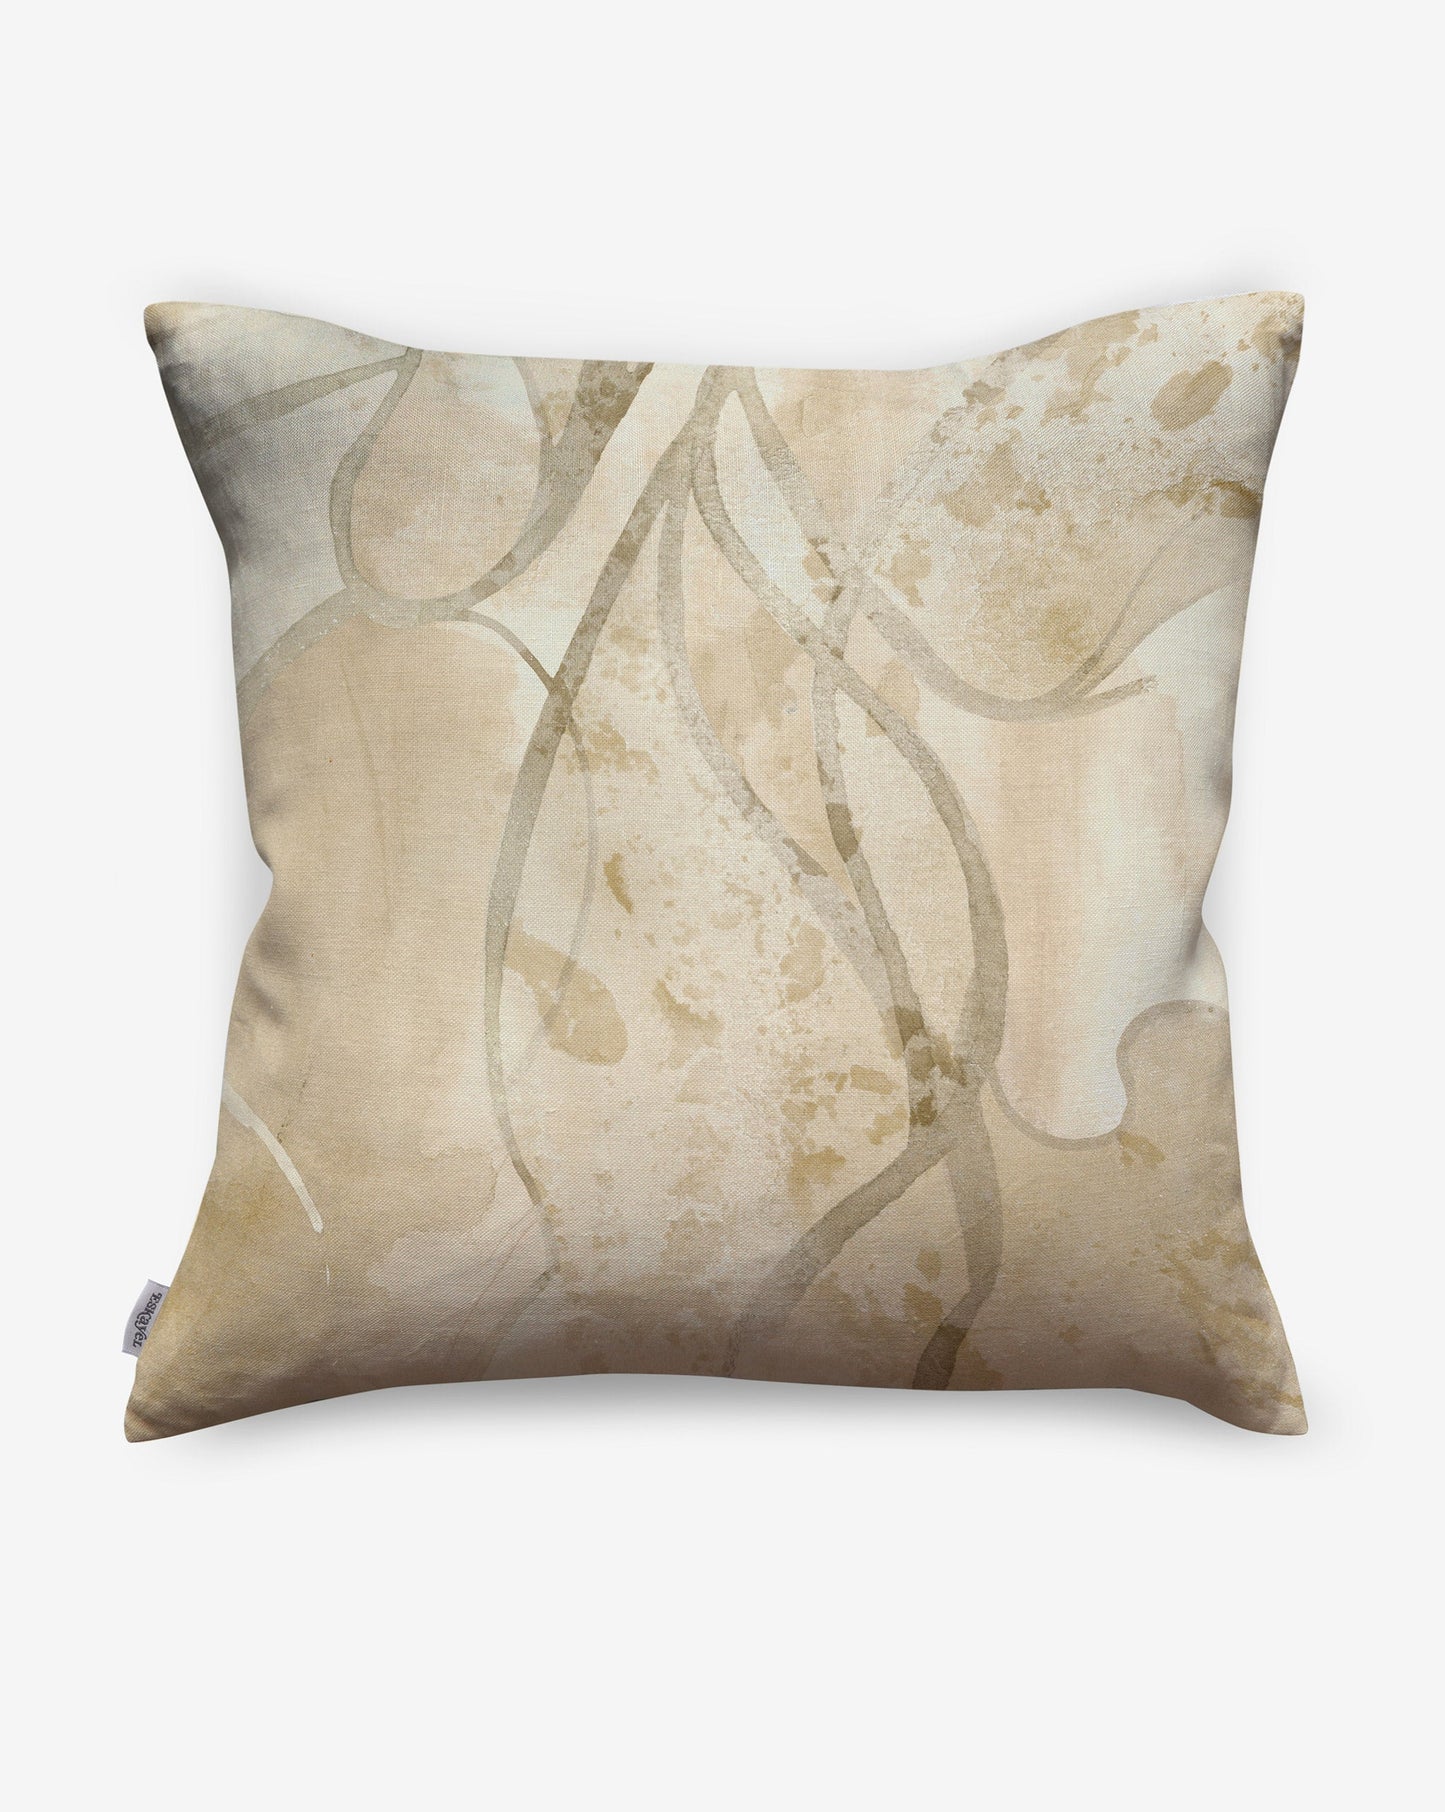 Eskayel Hibiscus Lily linen pillows in Pearl feature yellow tones. 